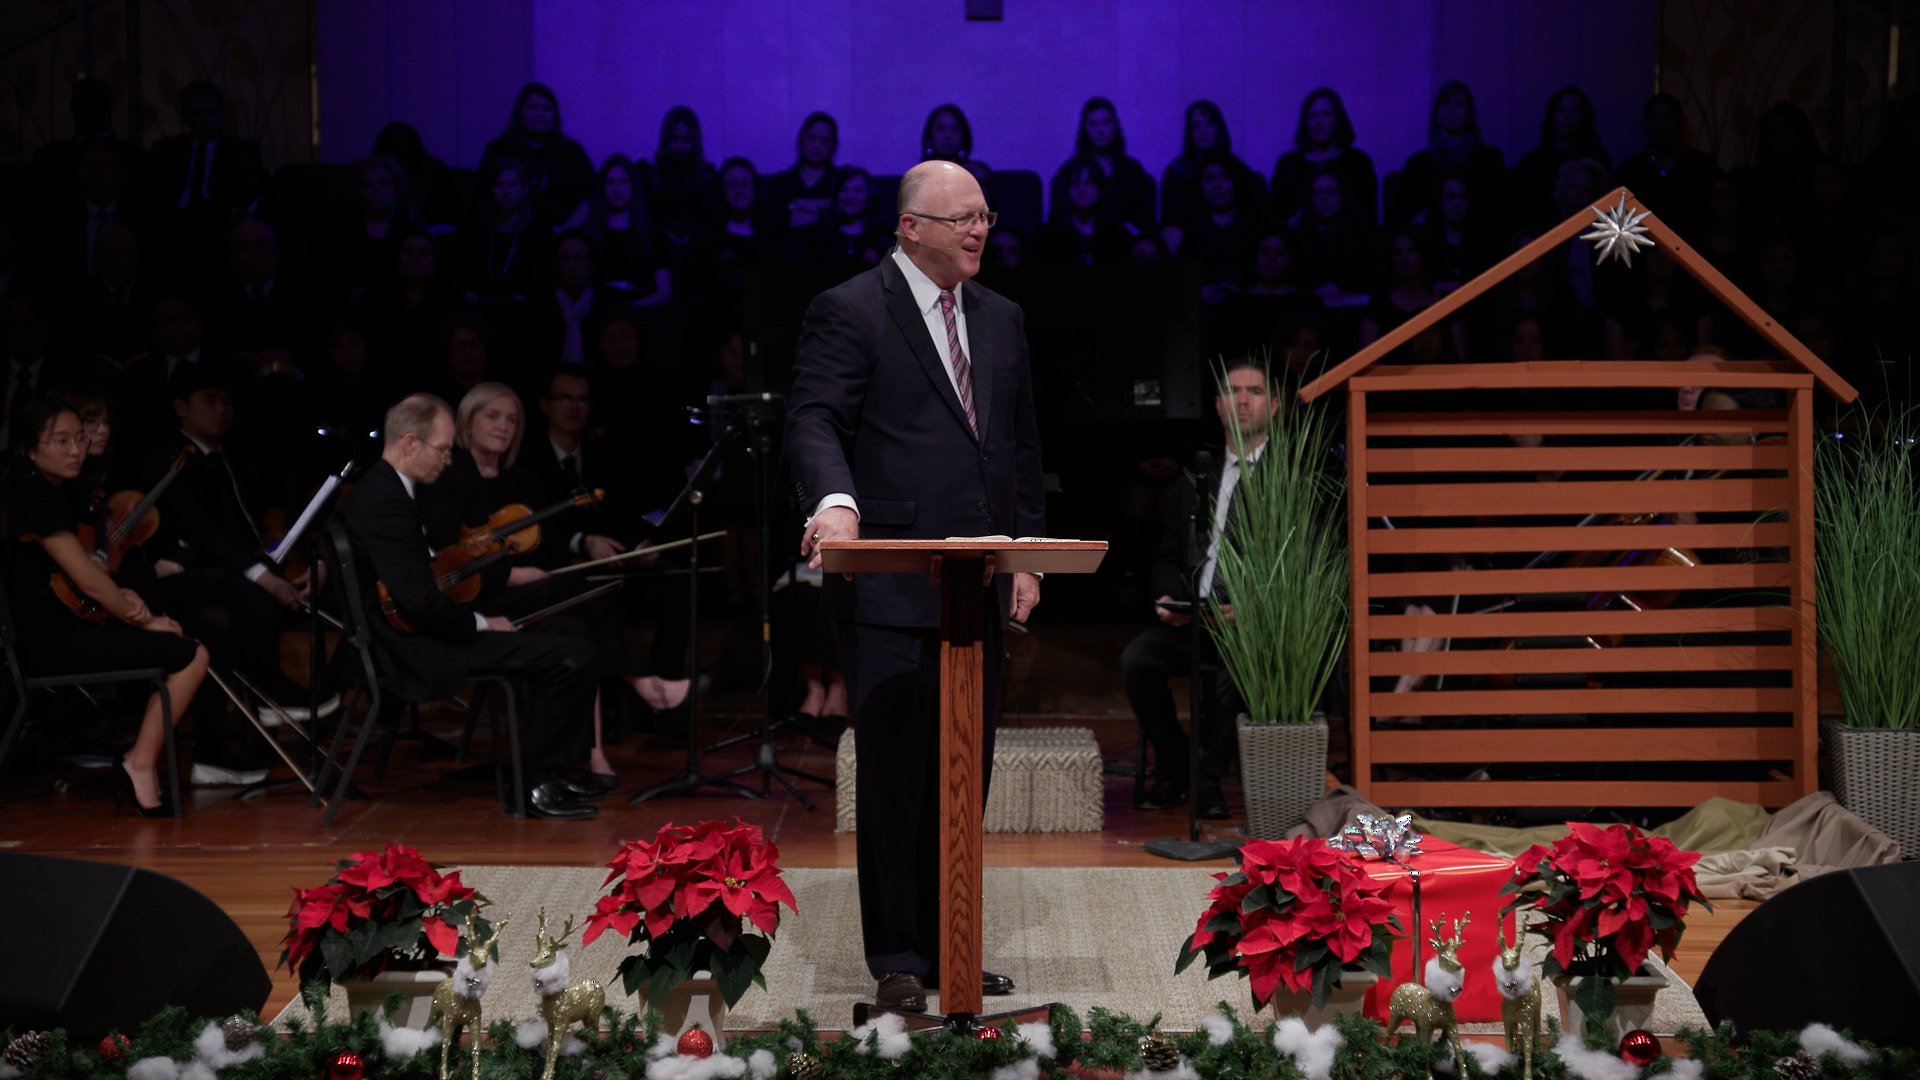 Pastor Paul Chappell: The Gift